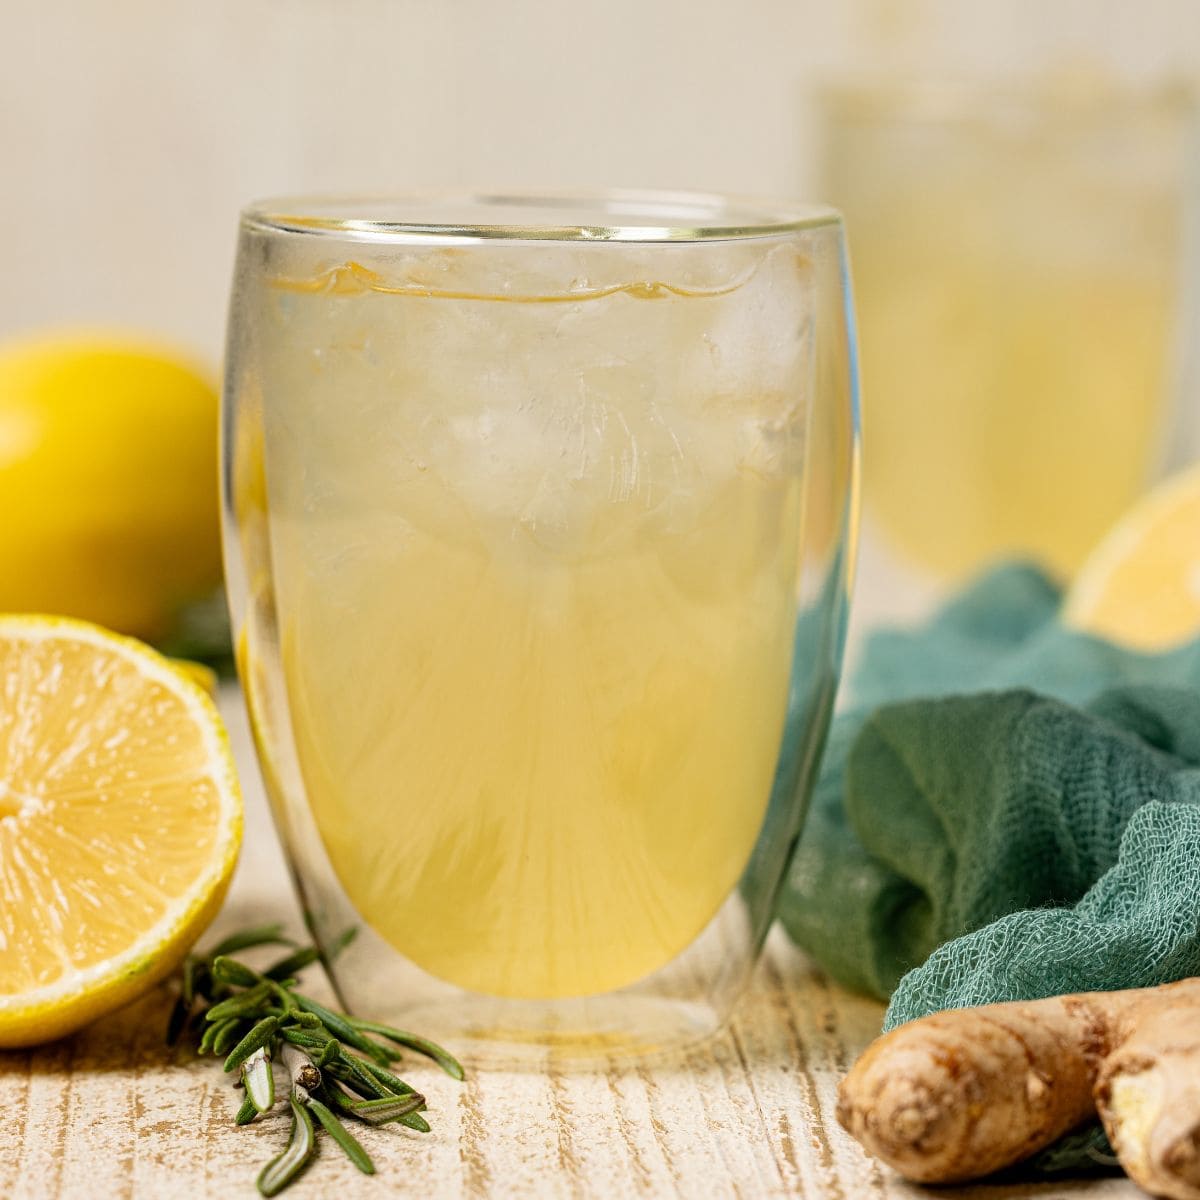 Two glasses of ginger ale with lemon, ginger root, and rosemary.